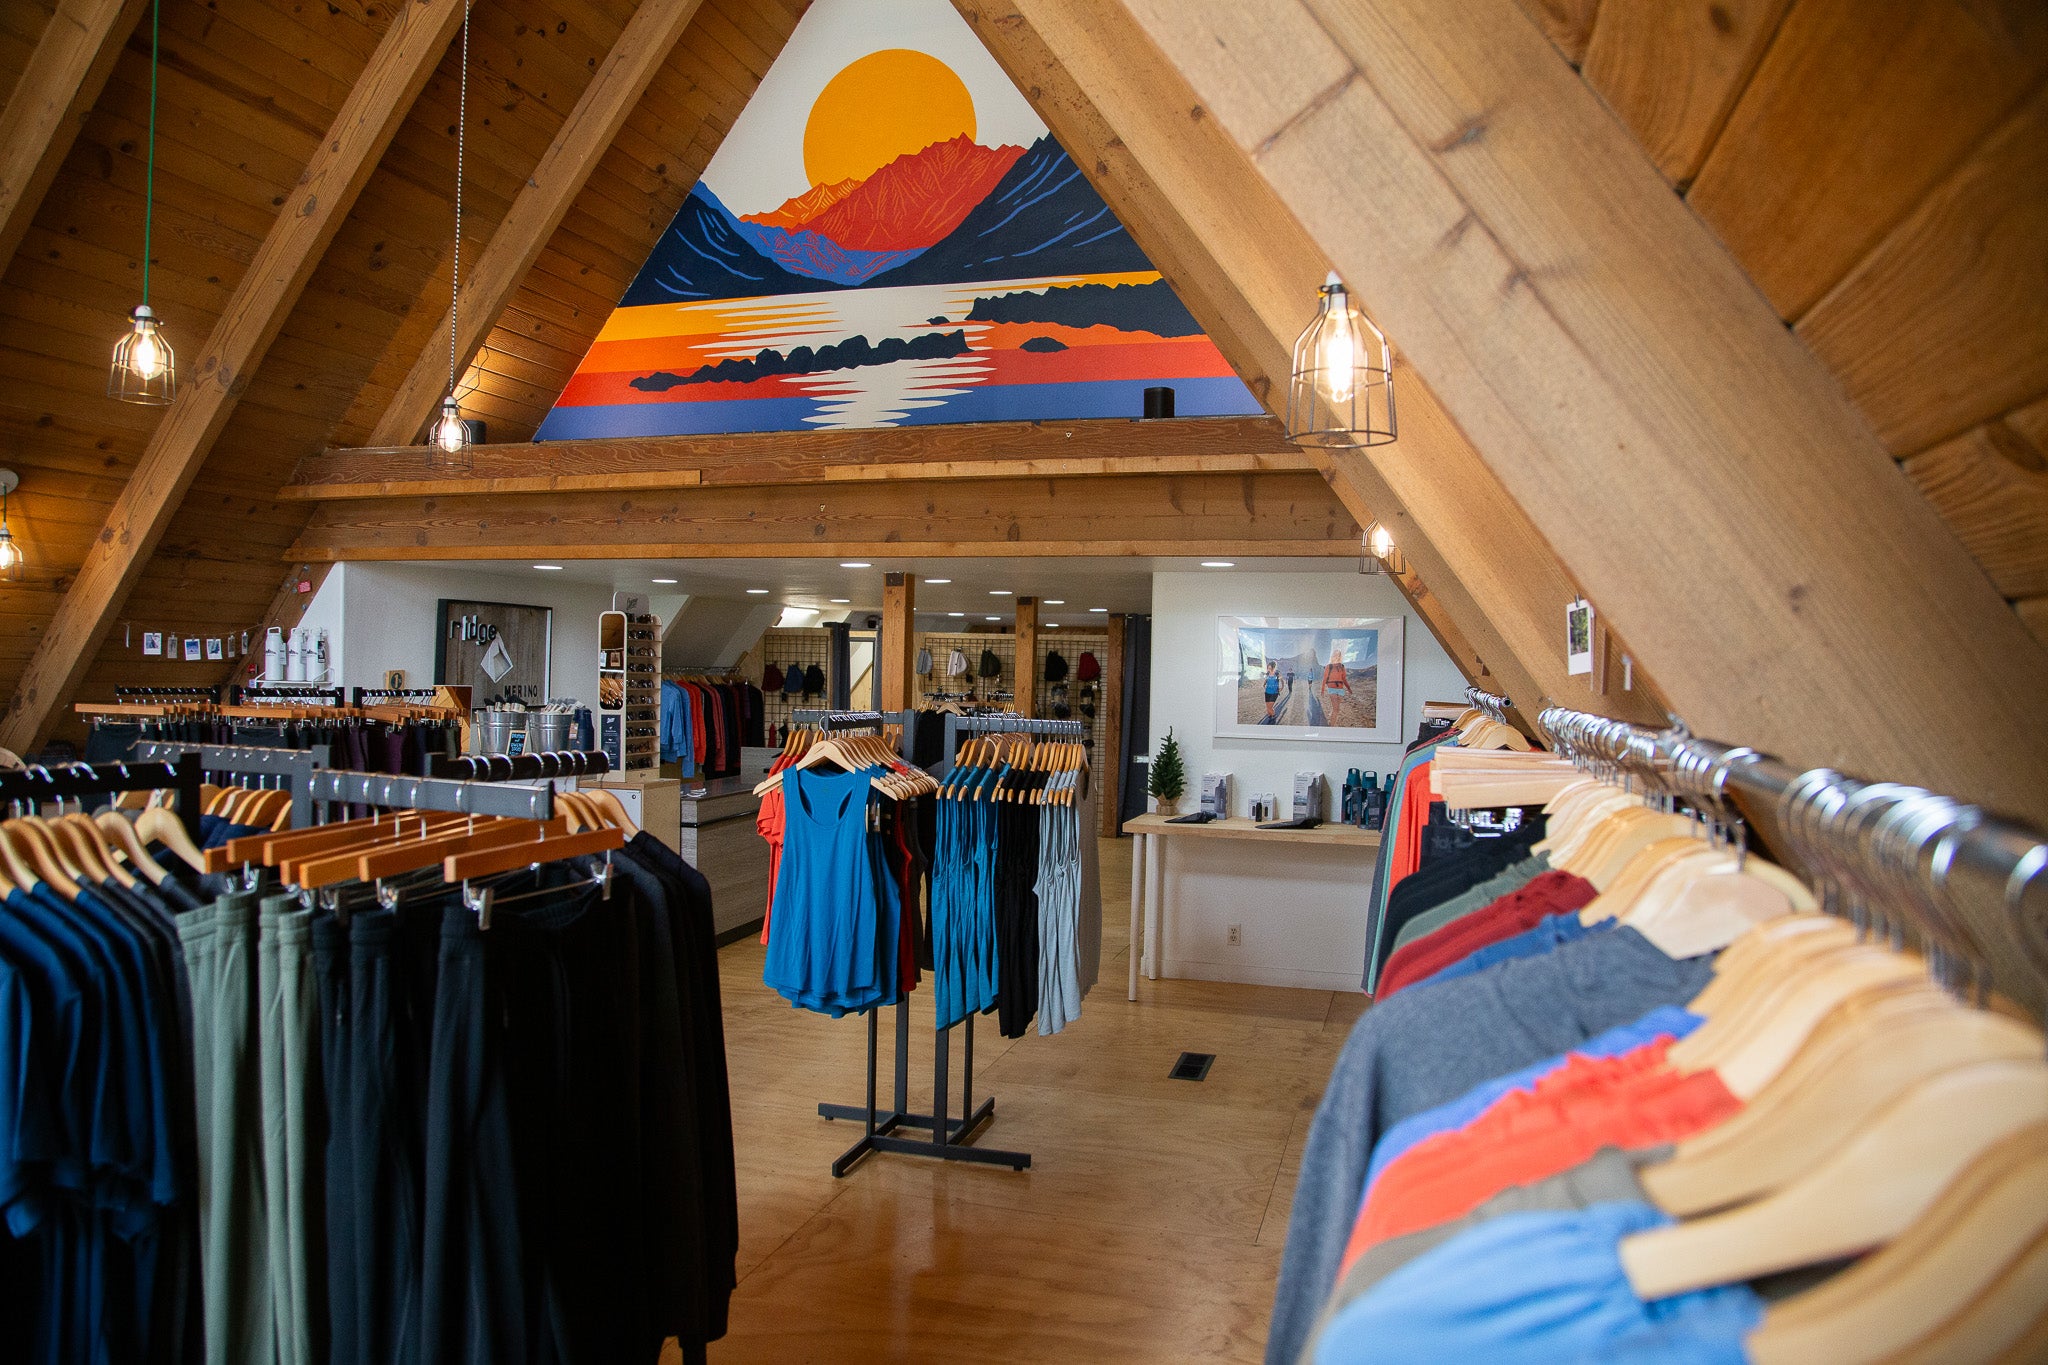 The inside of the Ridge Collective storefront in Mammoth Lakes